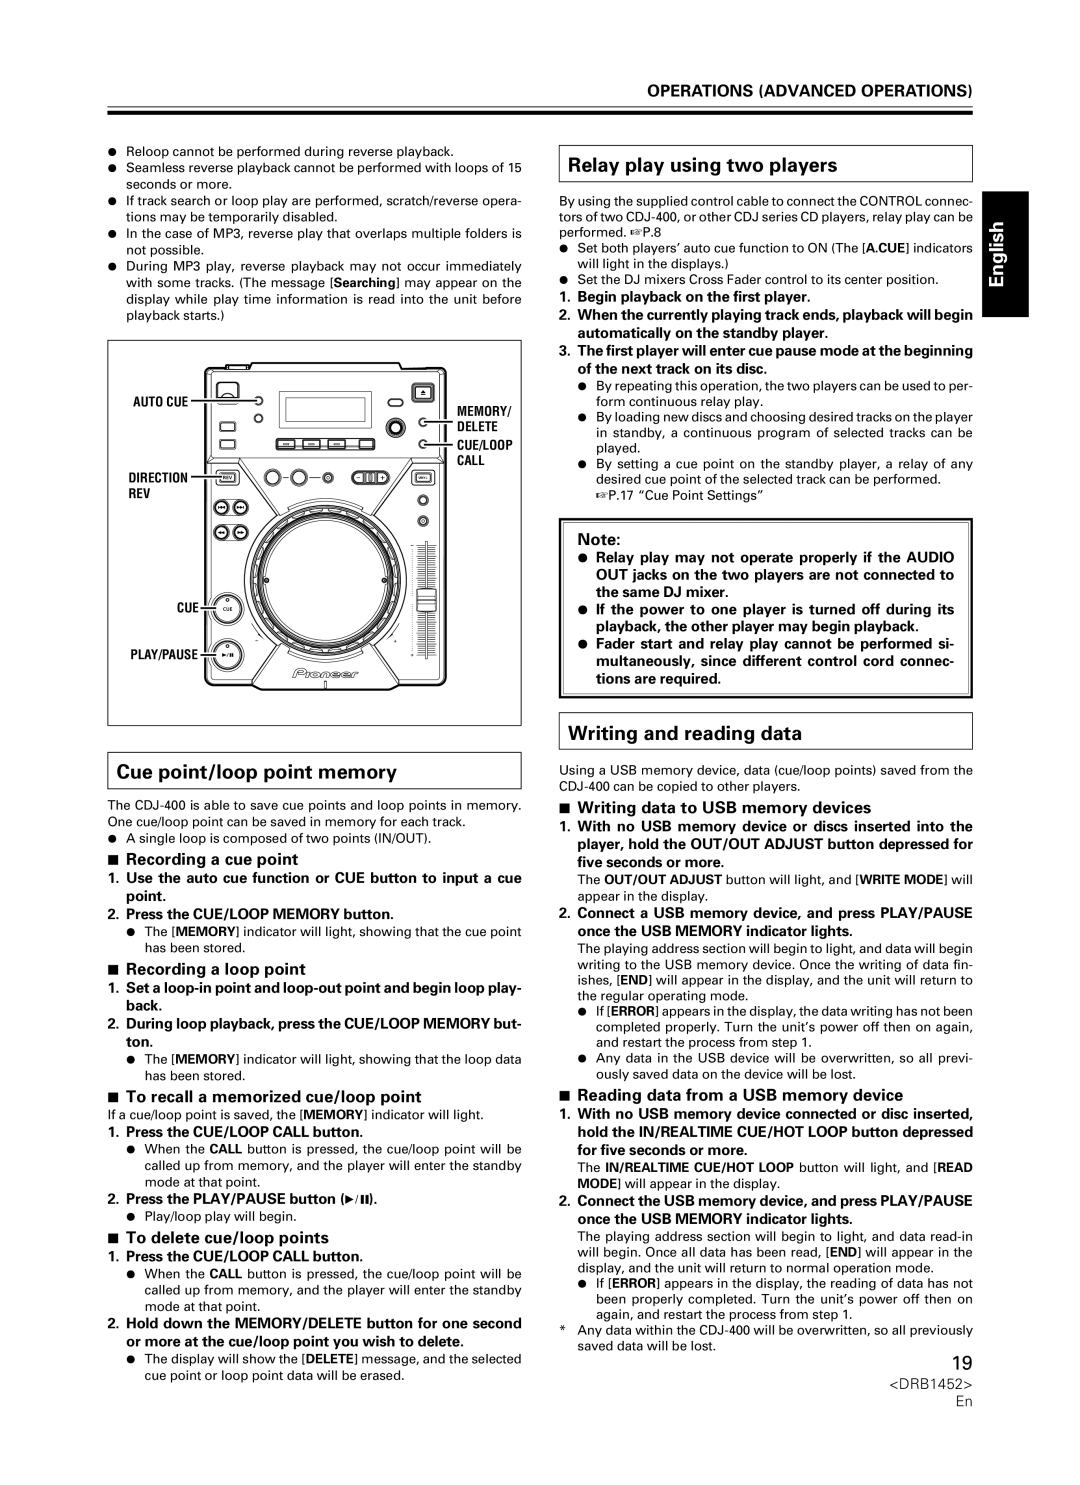 Pioneer CDJ-400 manual Relay play using two players, Writing and reading data, Cue point/loop point memory, English 